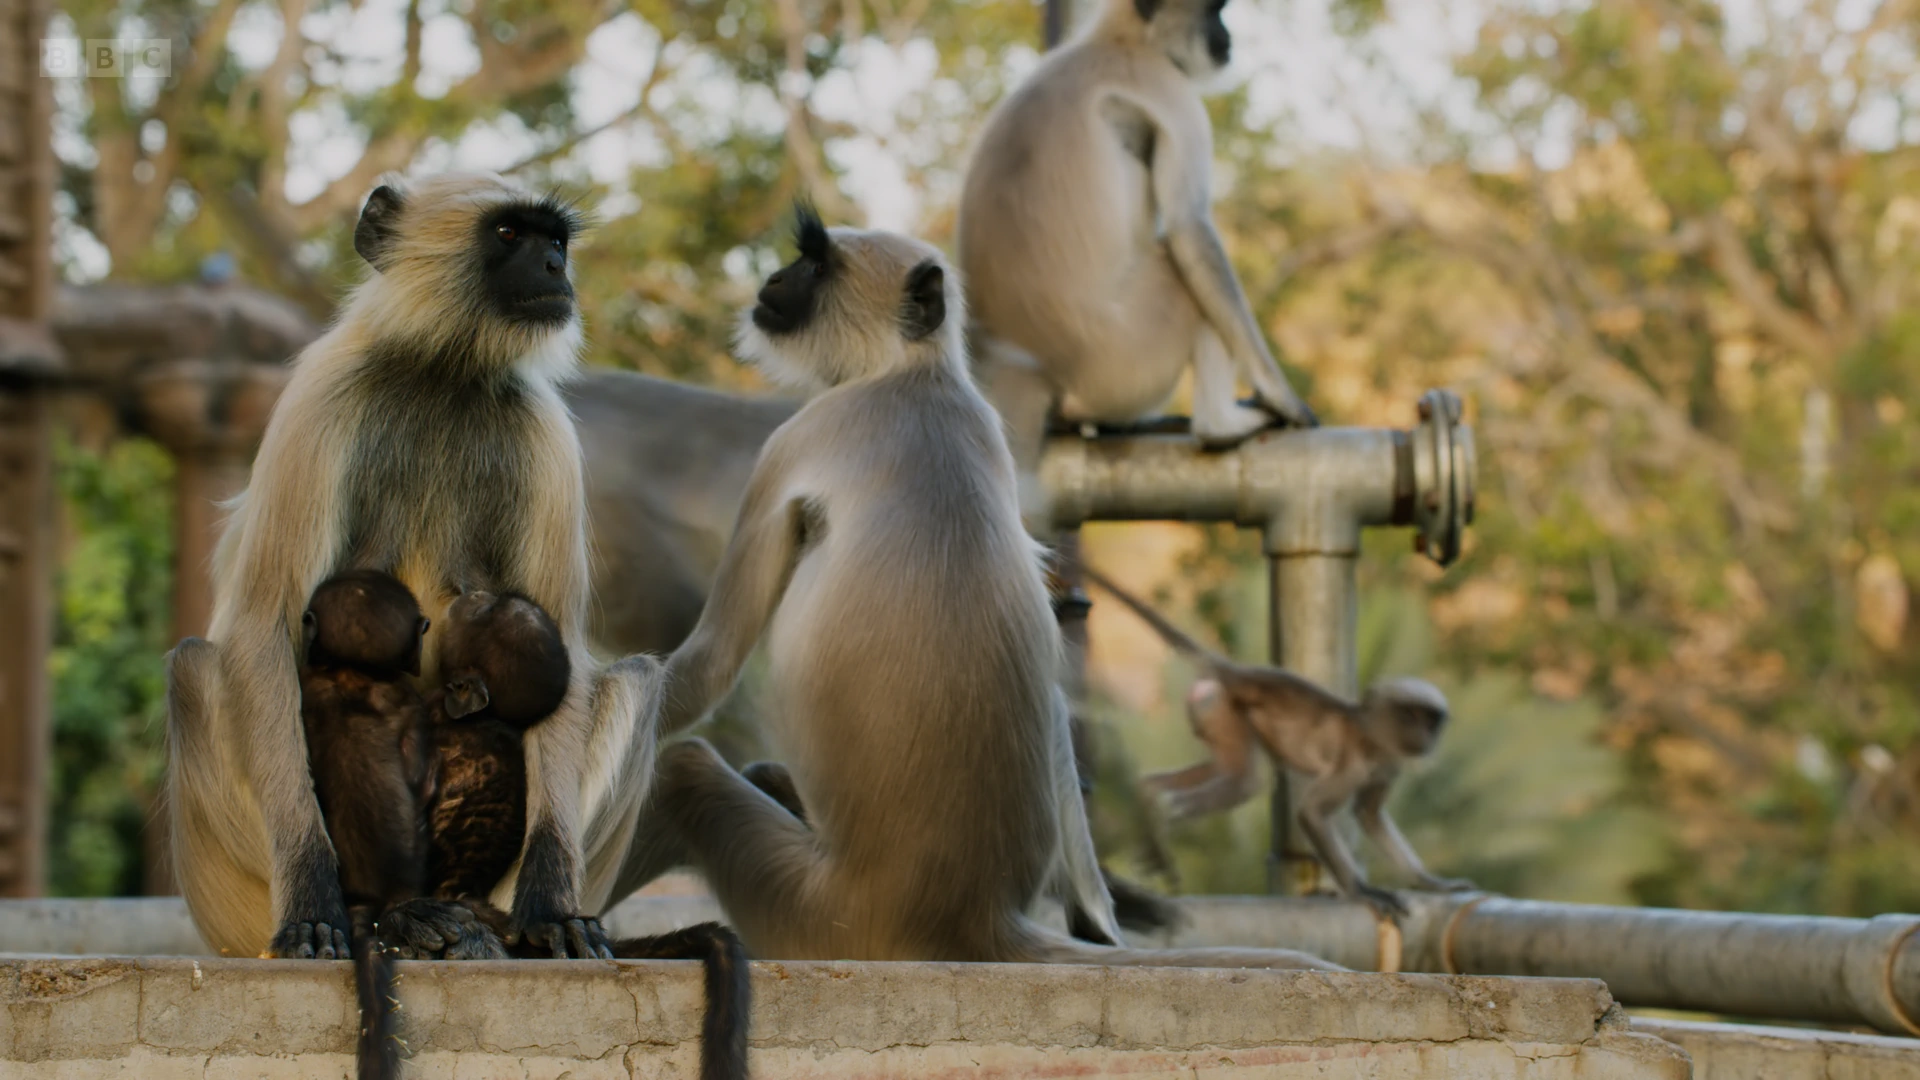 Northern plains grey langur (Semnopithecus entellus) as shown in Planet Earth II - Cities